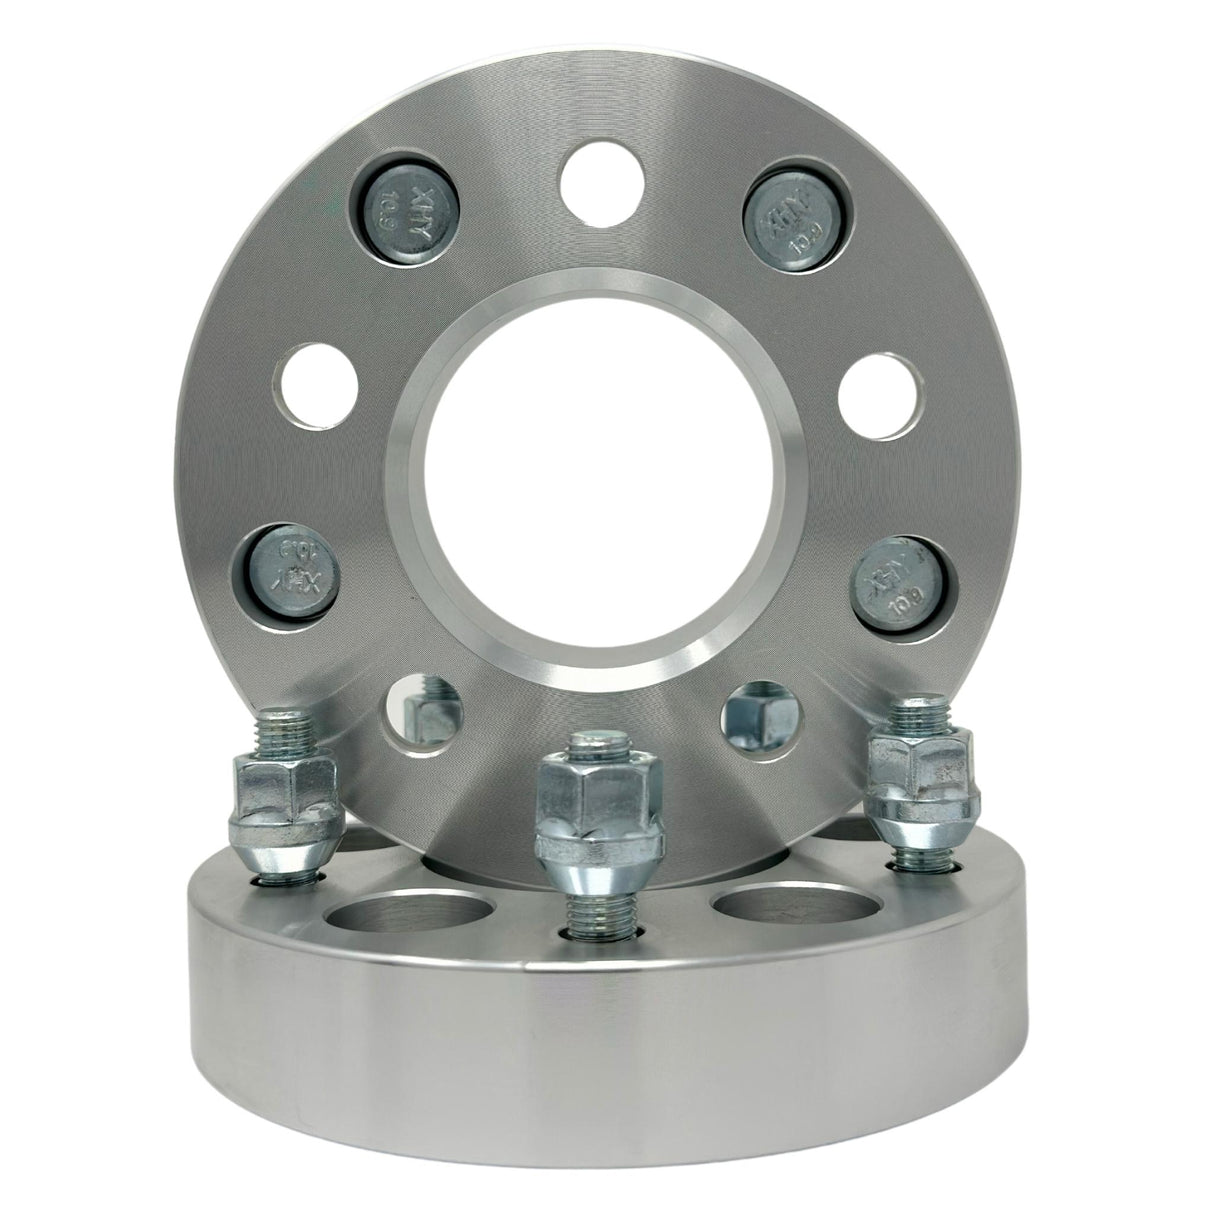 5x110 to 5x120.7 Wheel Adapters 1" Inch (25mm) 12x1.5 Studs & Lug Nuts 65.1mm Center Bore | 5x110 to 5x4.75